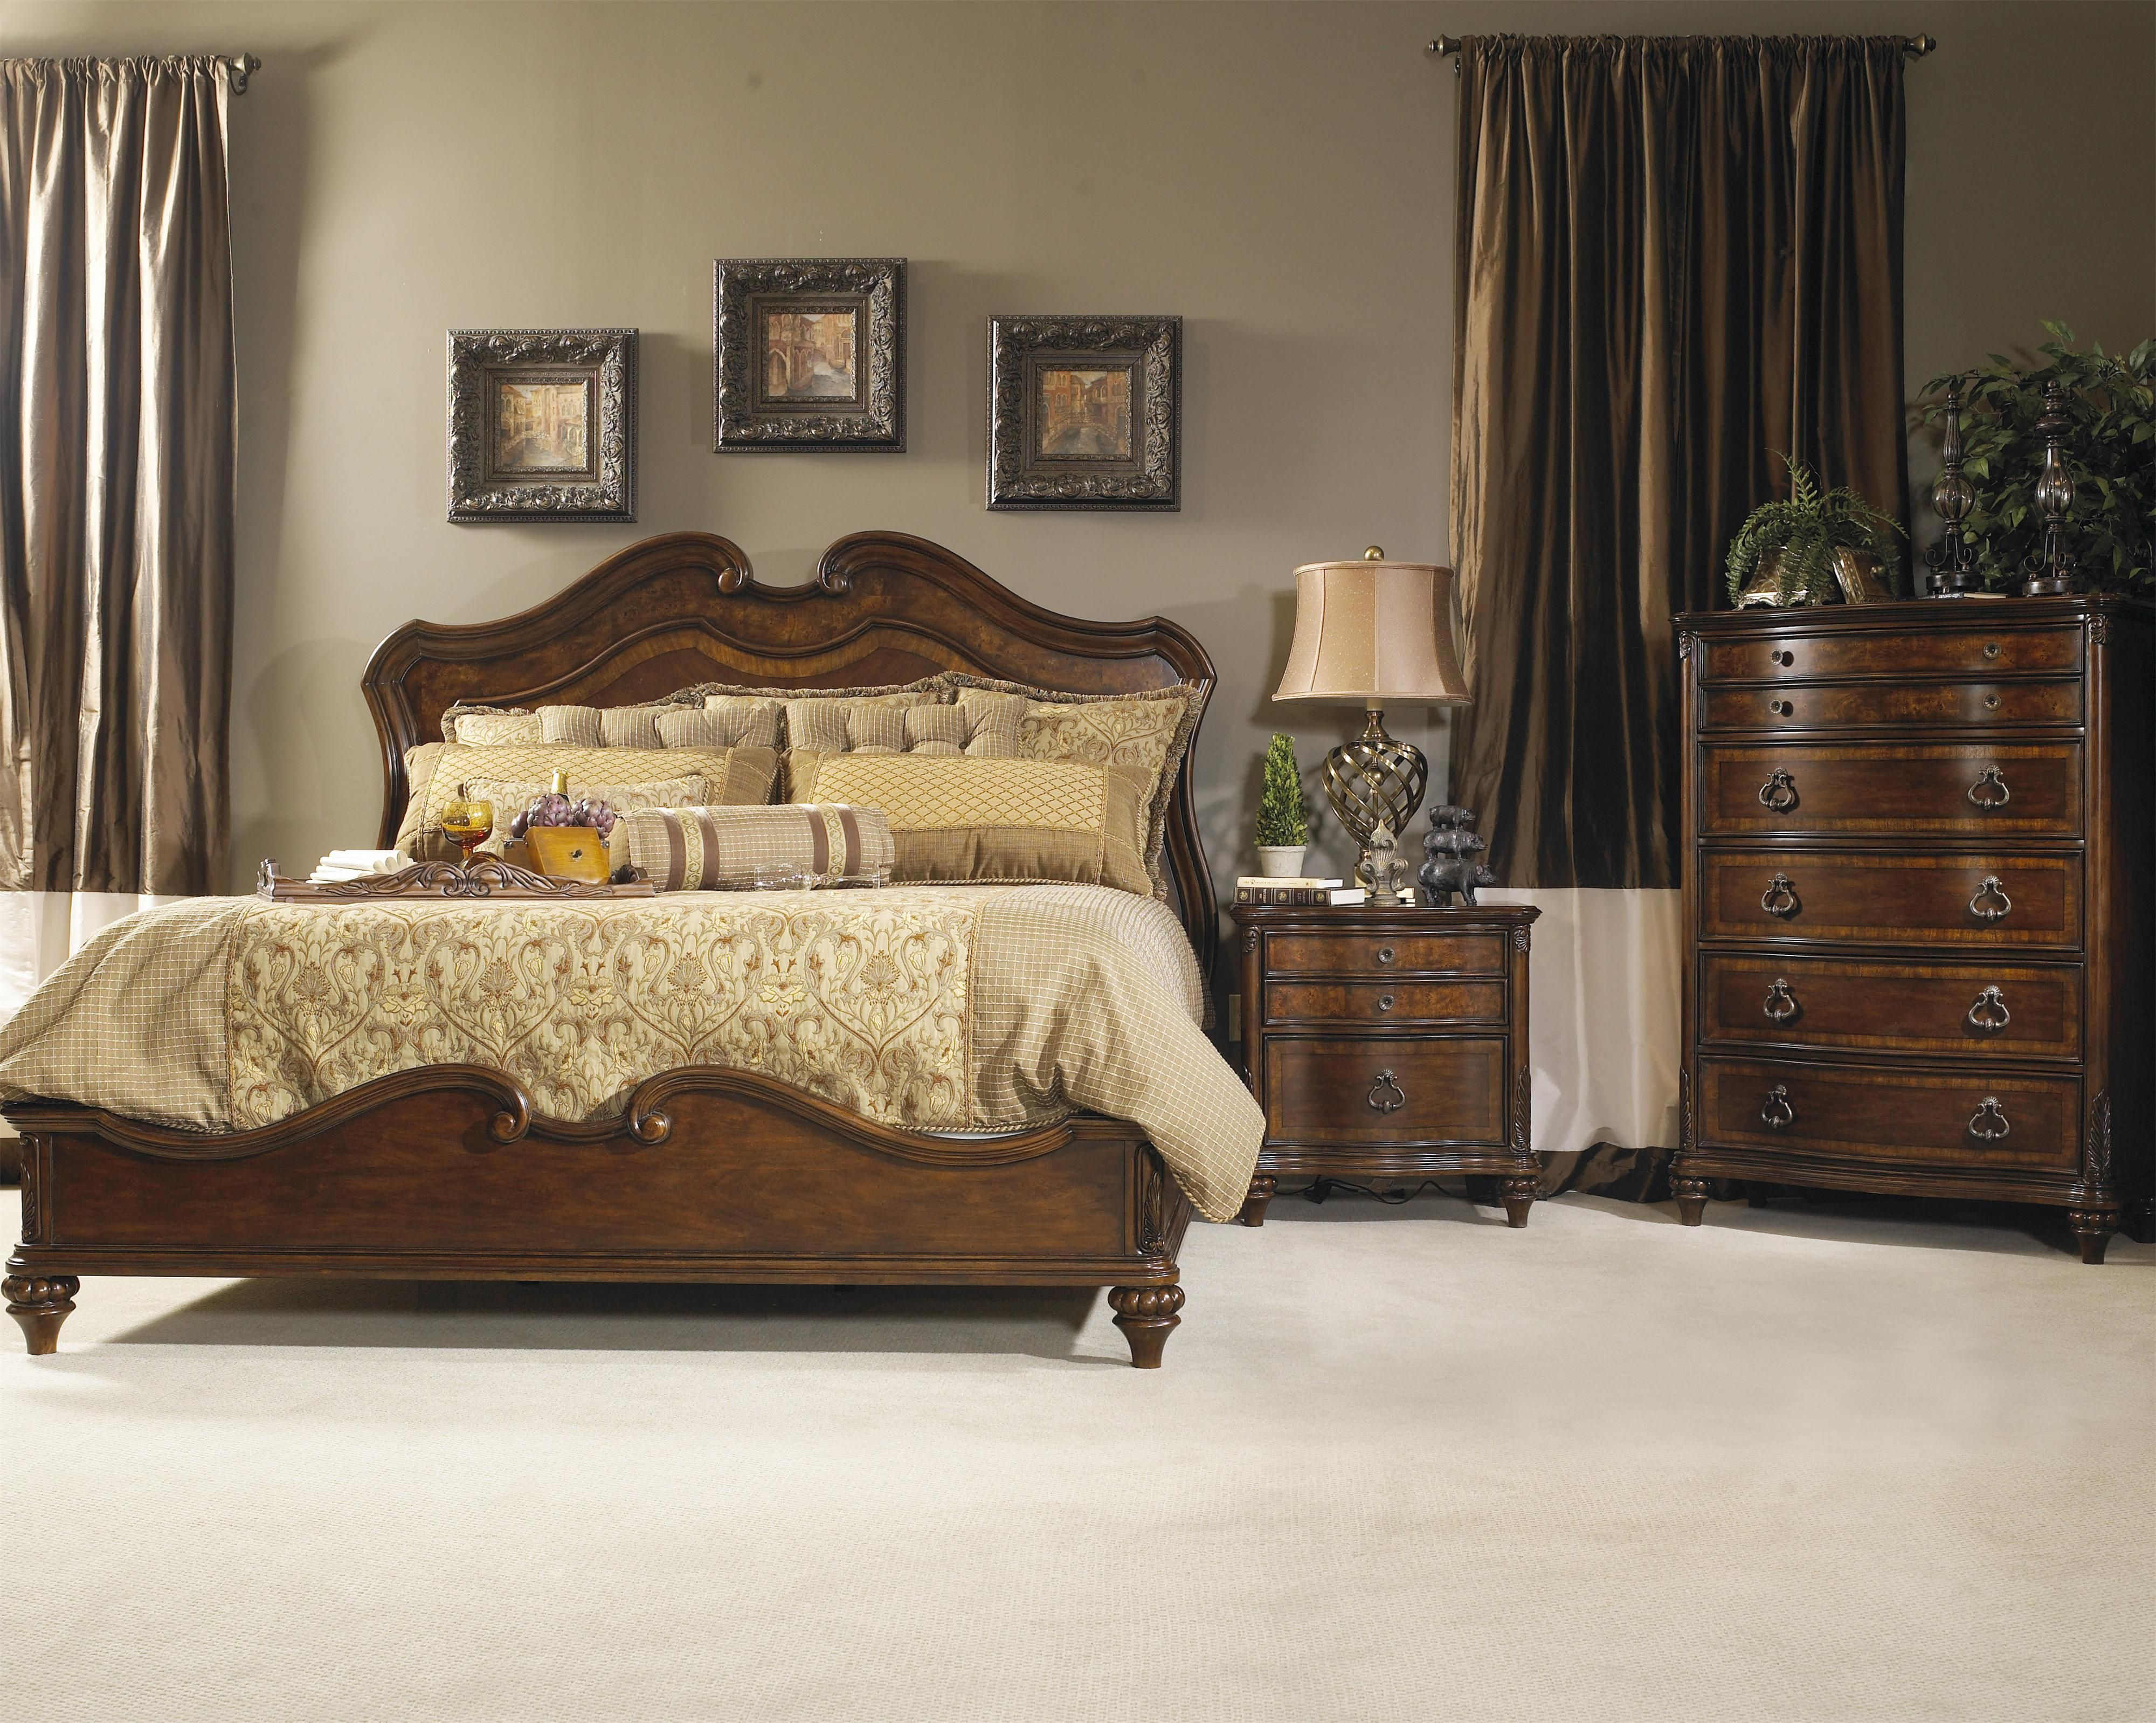 Marisol 5 Piece Bedroom Set Fairmont Designs Home Ideas intended for size 4000 X 3196